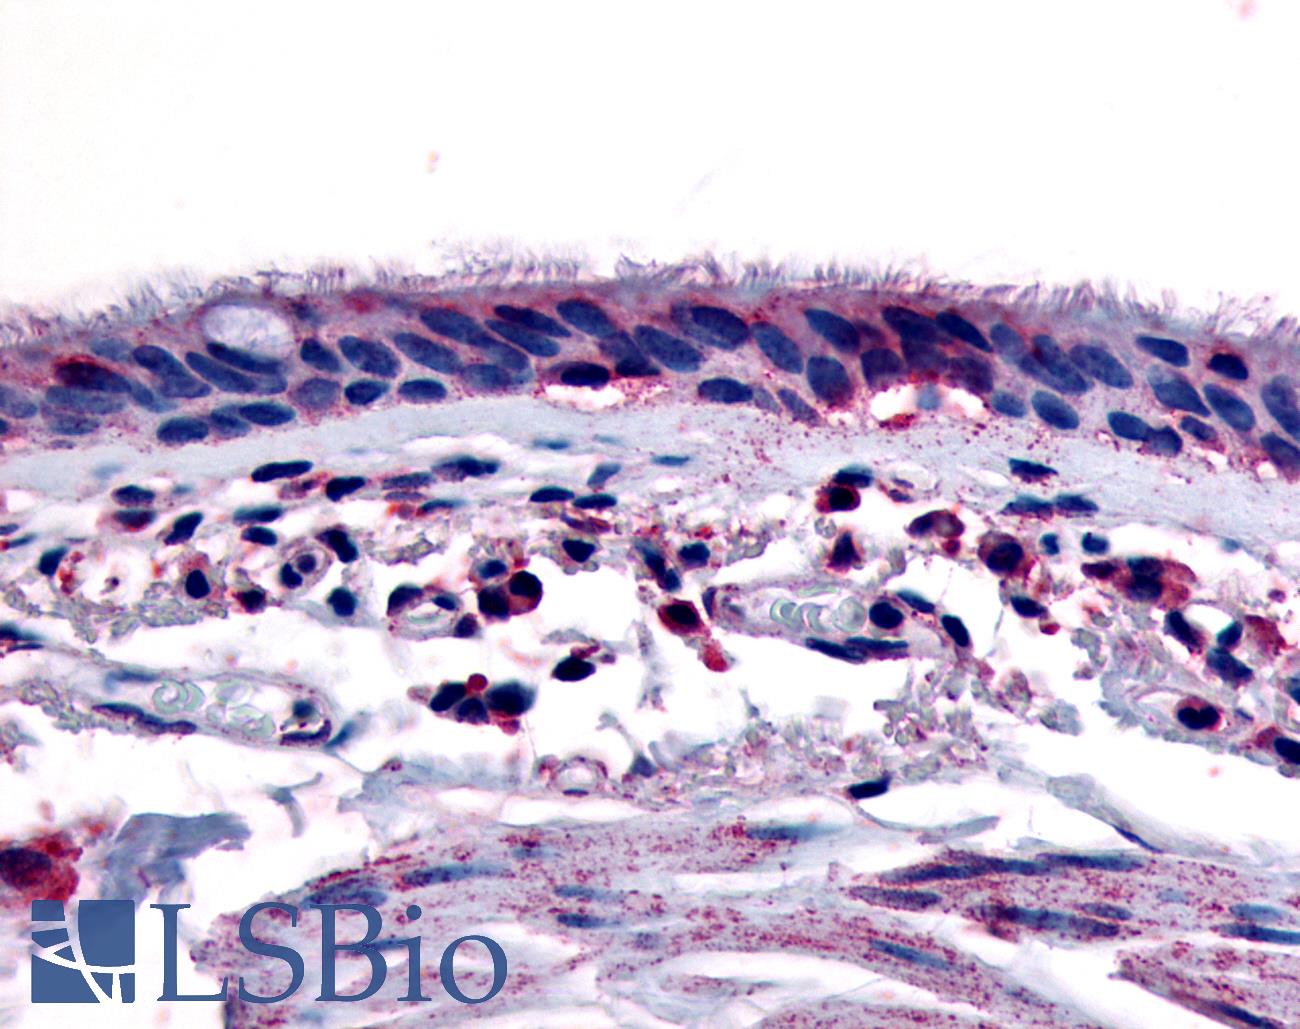 AHR Antibody - Anti-Aryl Hydrocarbon Receptor antibody IHC of human respiratory epithelium and bronchial smooth muscle. Immunohistochemistry of formalin-fixed, paraffin-embedded tissue after heat-induced antigen retrieval.